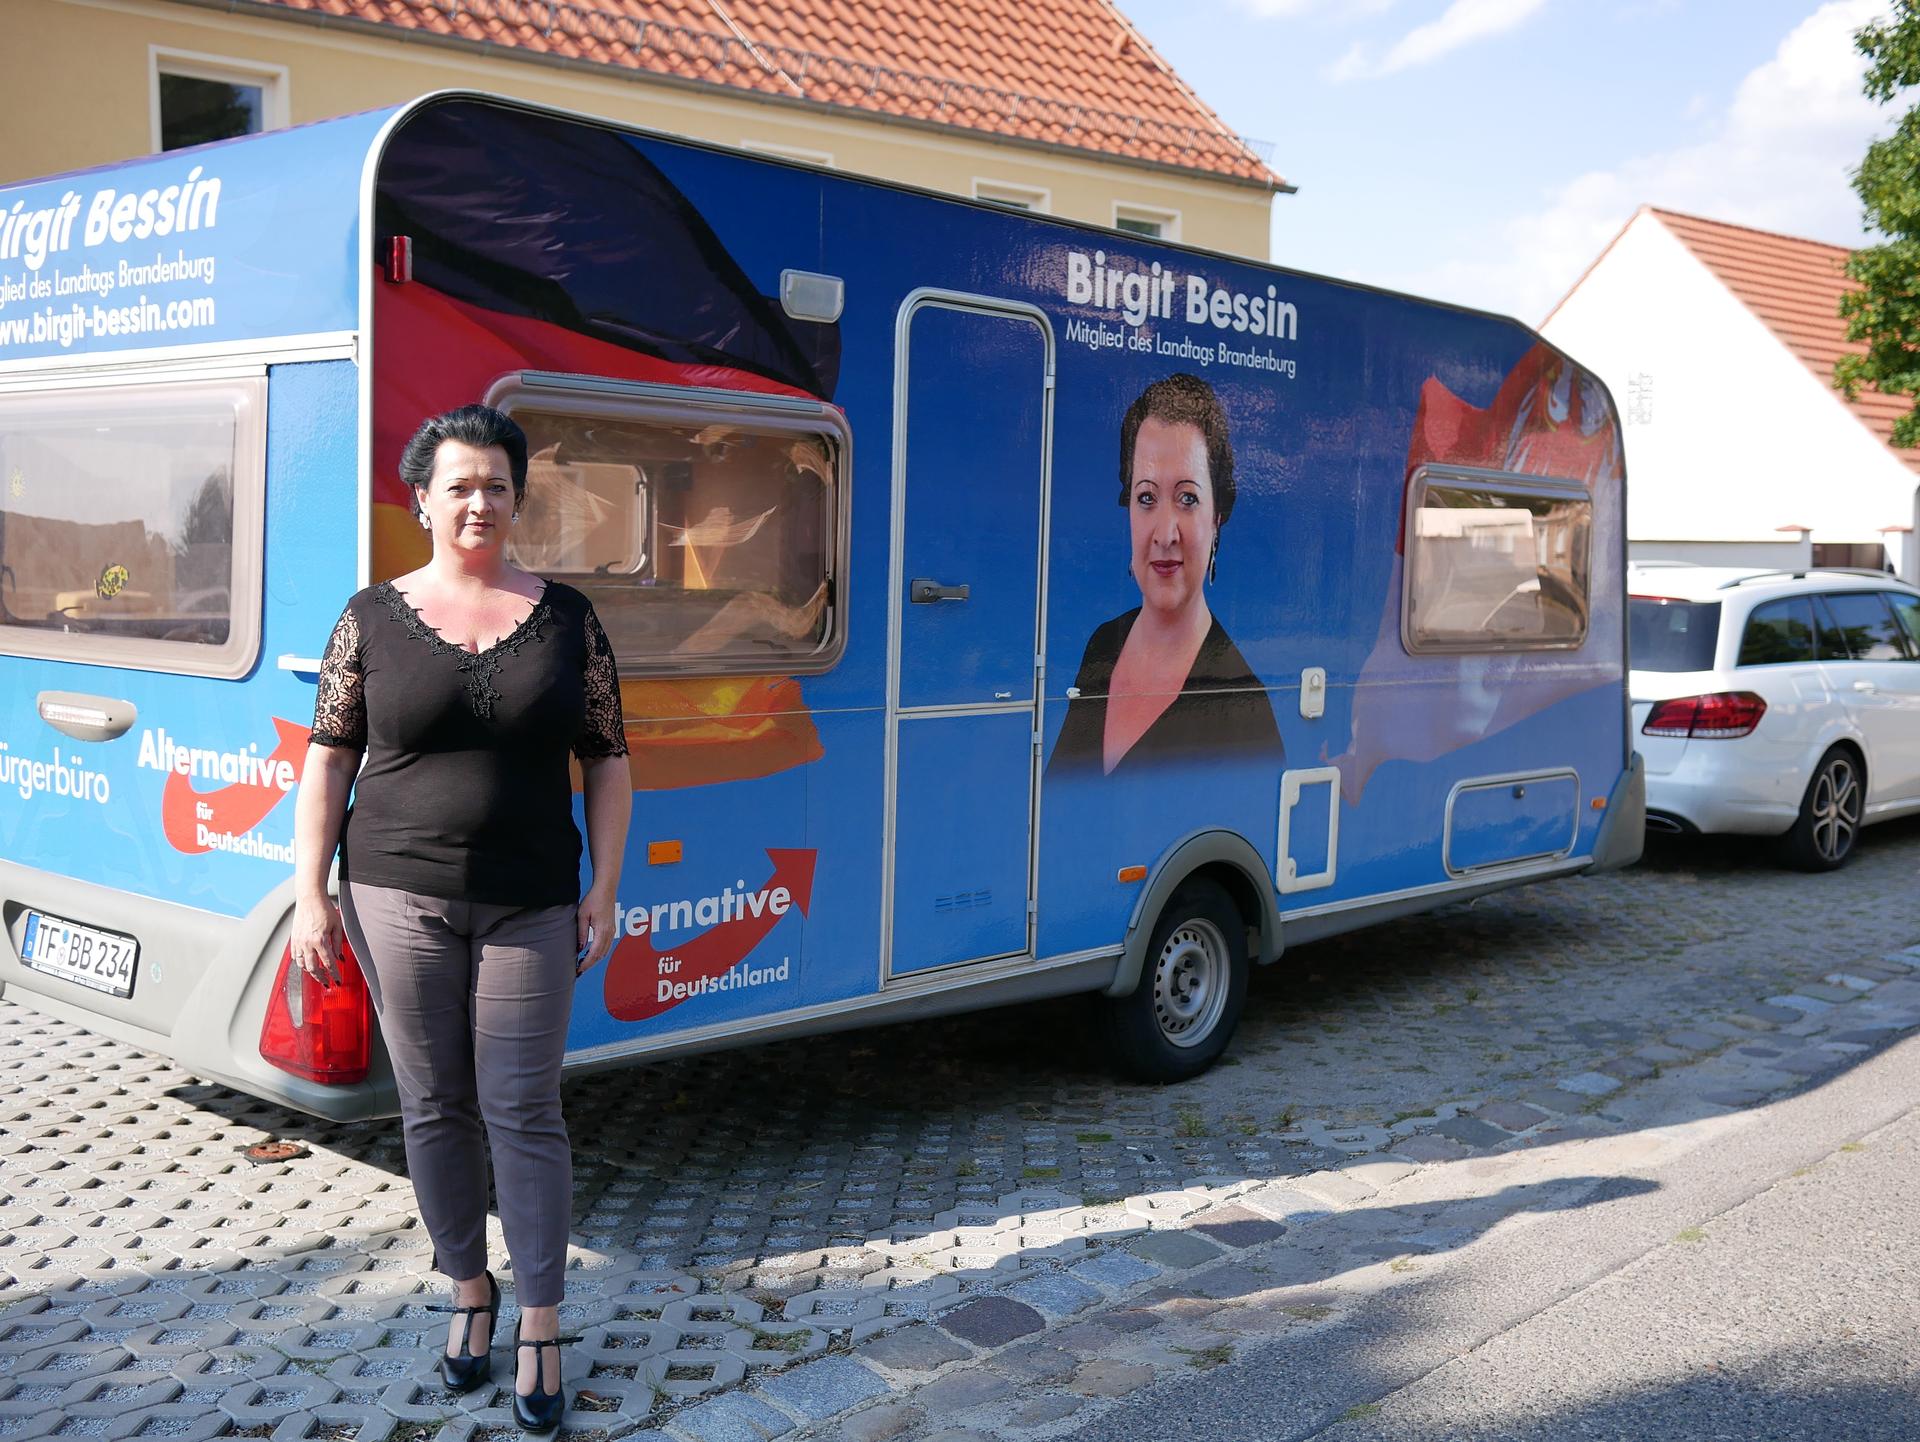 Birgit Bessin poses with a trailer bearing the logo of her party, the AfD